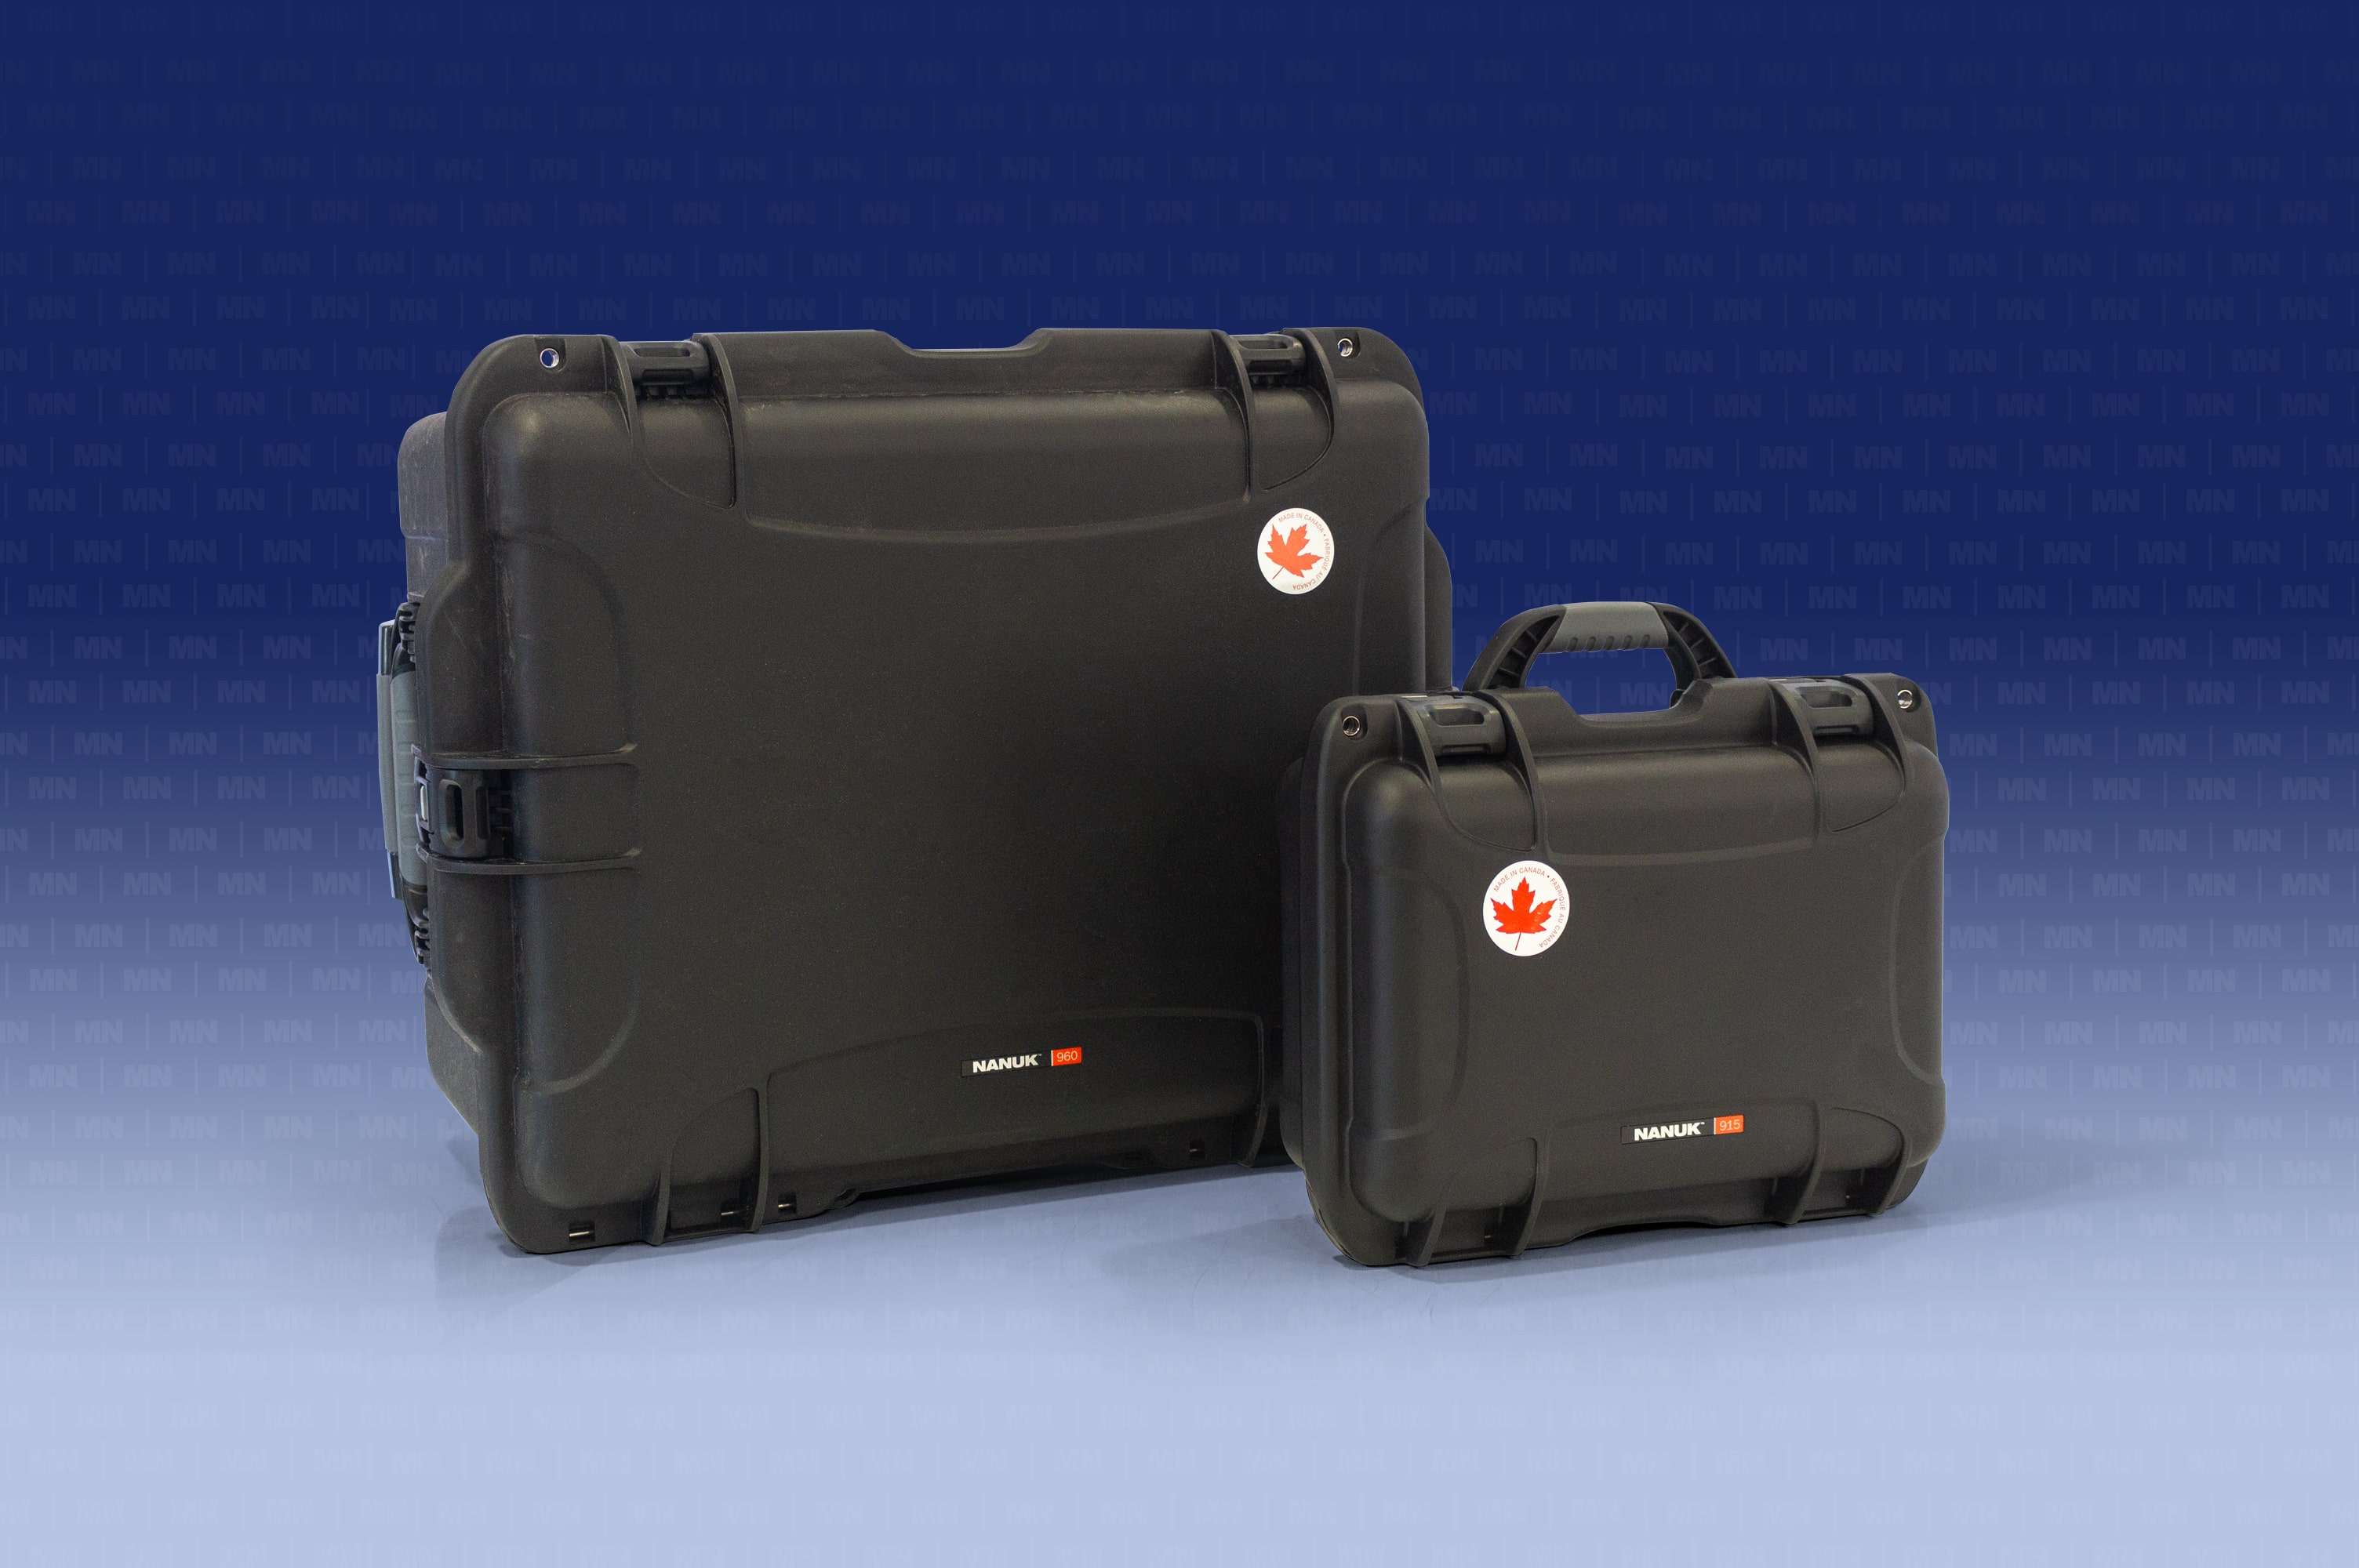 All transport cases, including the topside control case, are manufactured in Canada. They are IP rated for use in marine settings